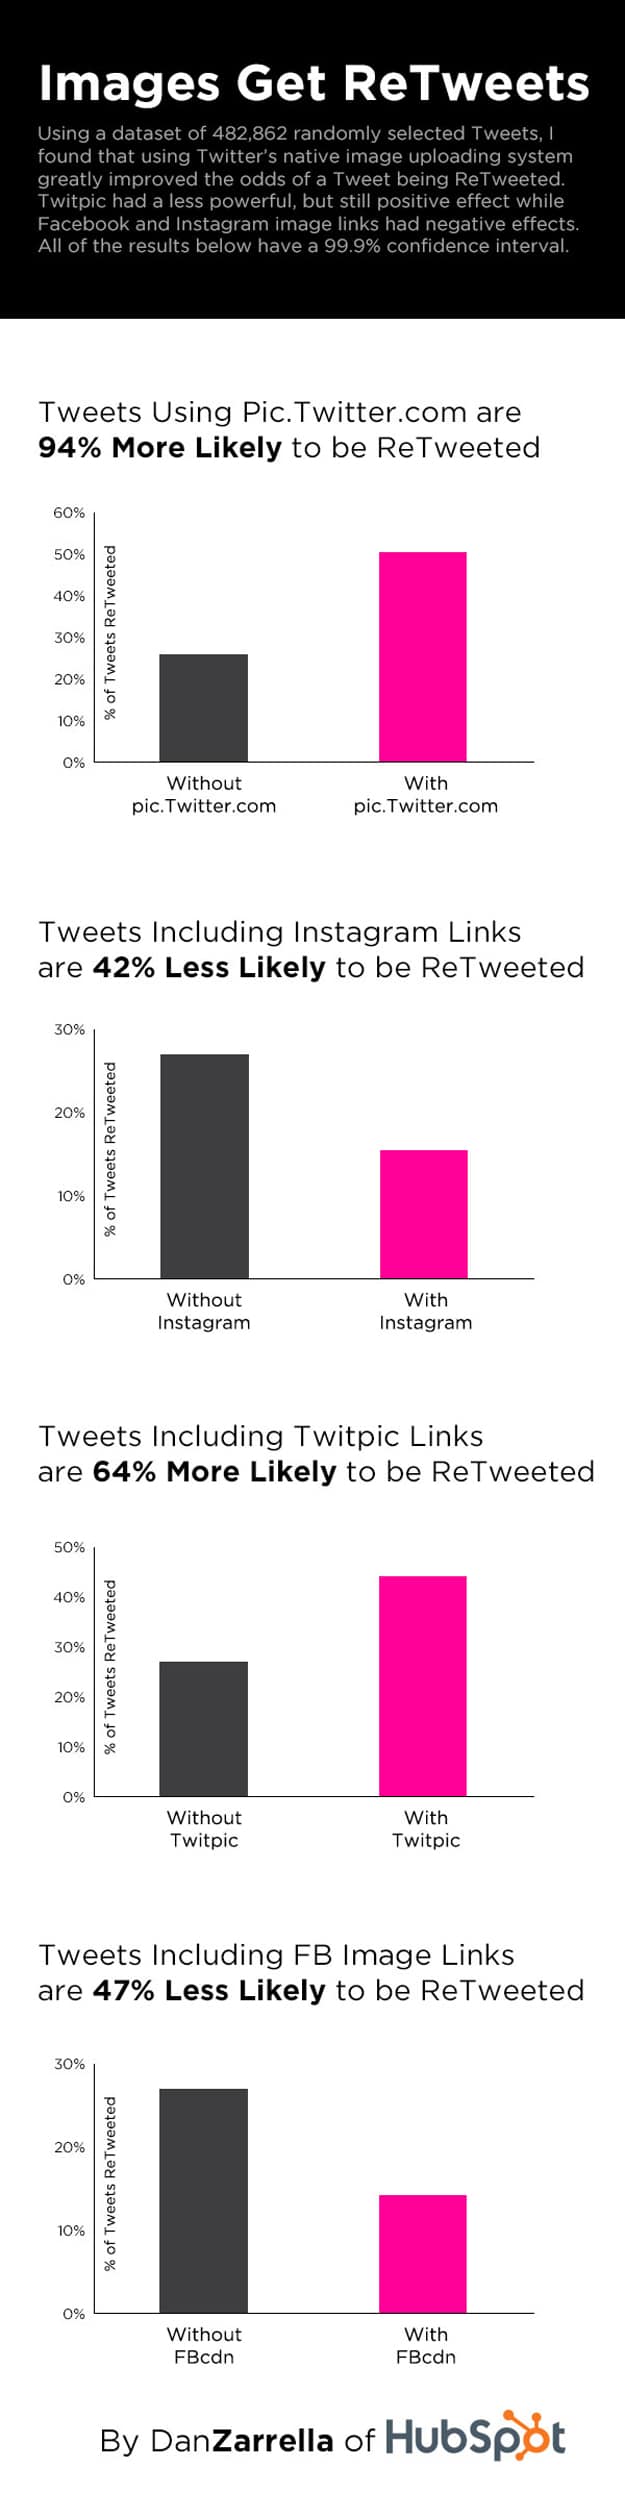 The Way You Tweet Pictures Drastically Affects Your Retweets [Chart]